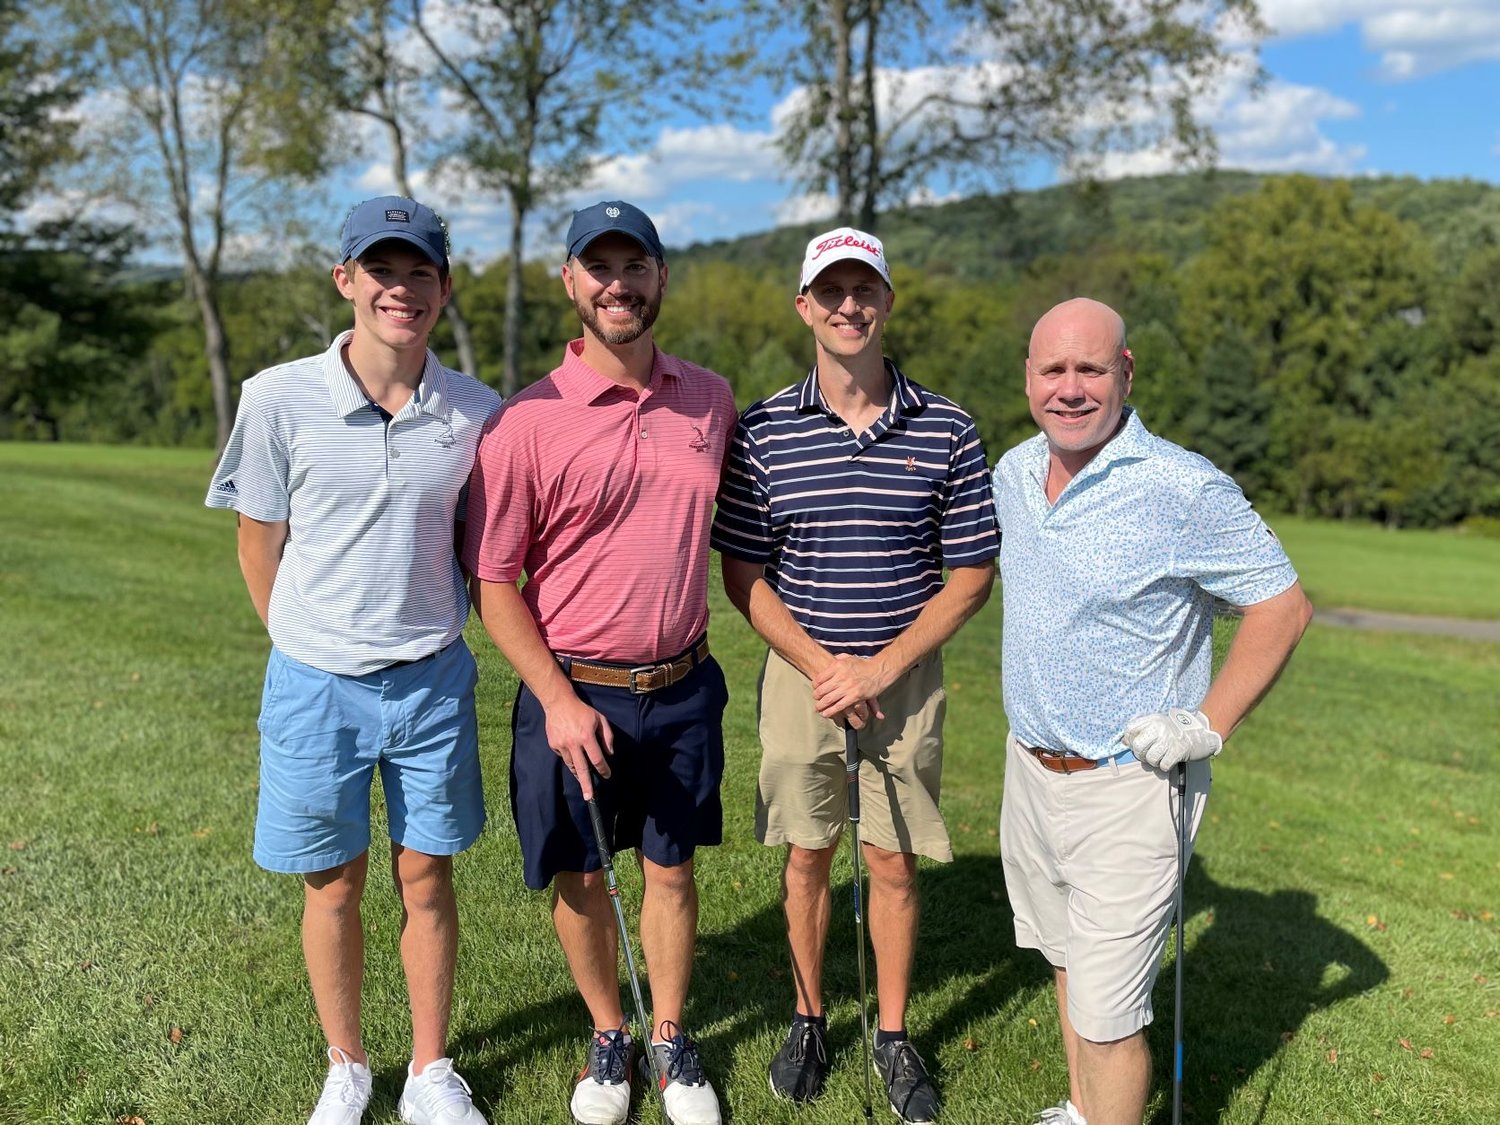 Carter Crivella, Nick Crivella, Chad Crivella and Spencer Neal golfed to raise funds for Casey Cares Foundation on September 11.